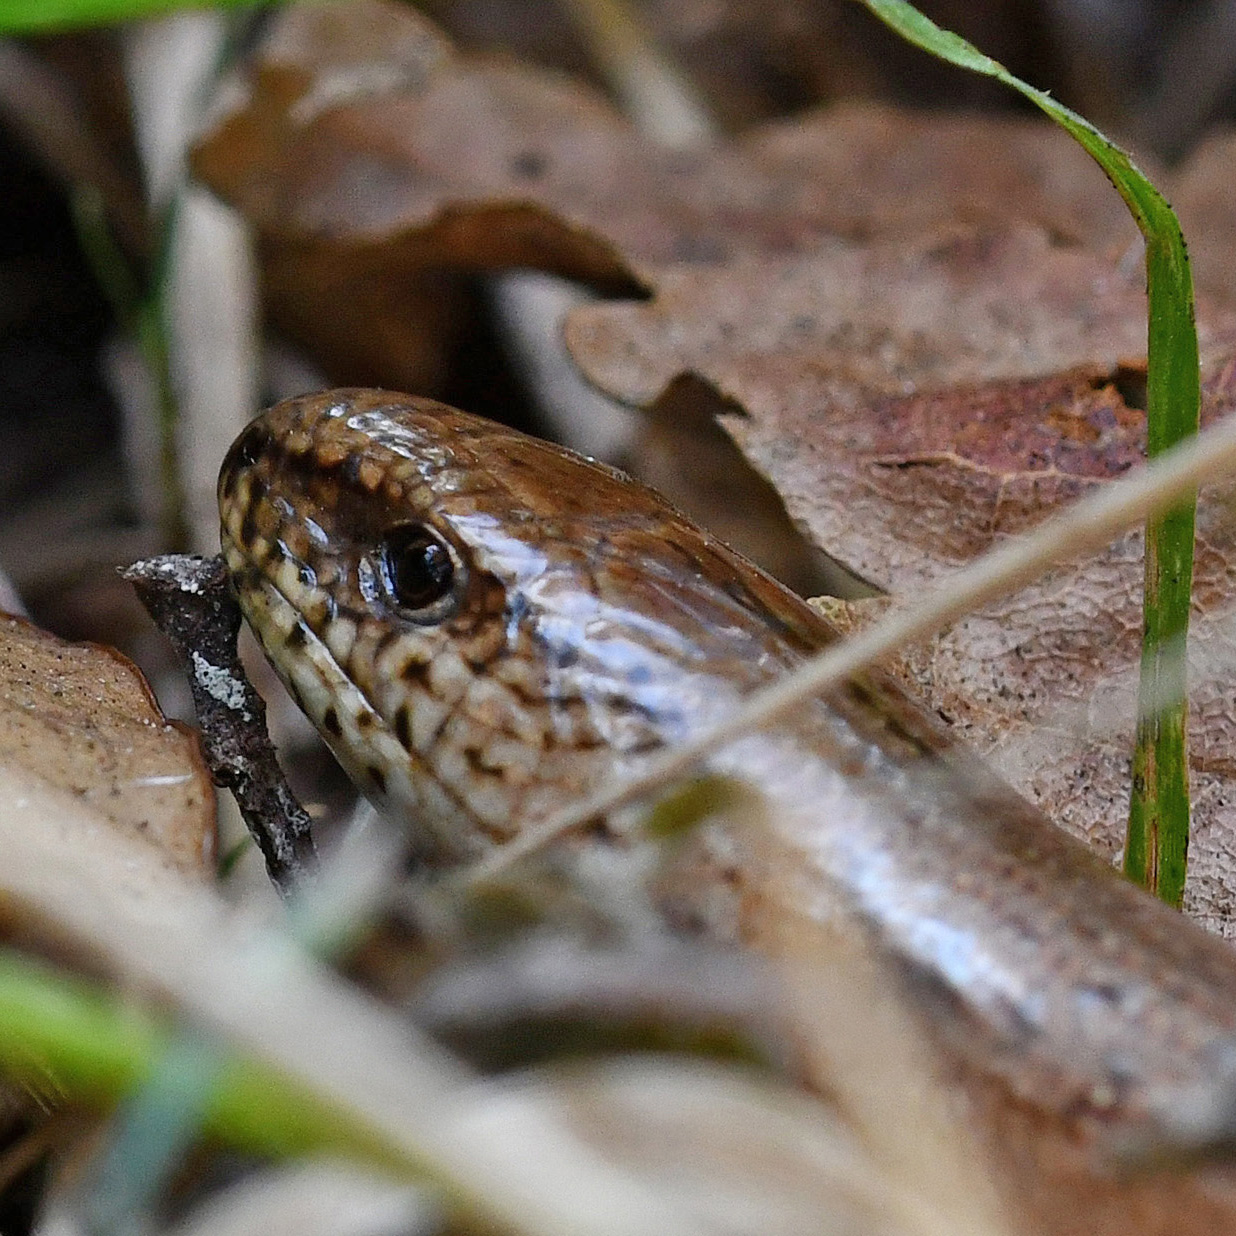 a close up of a slow worm